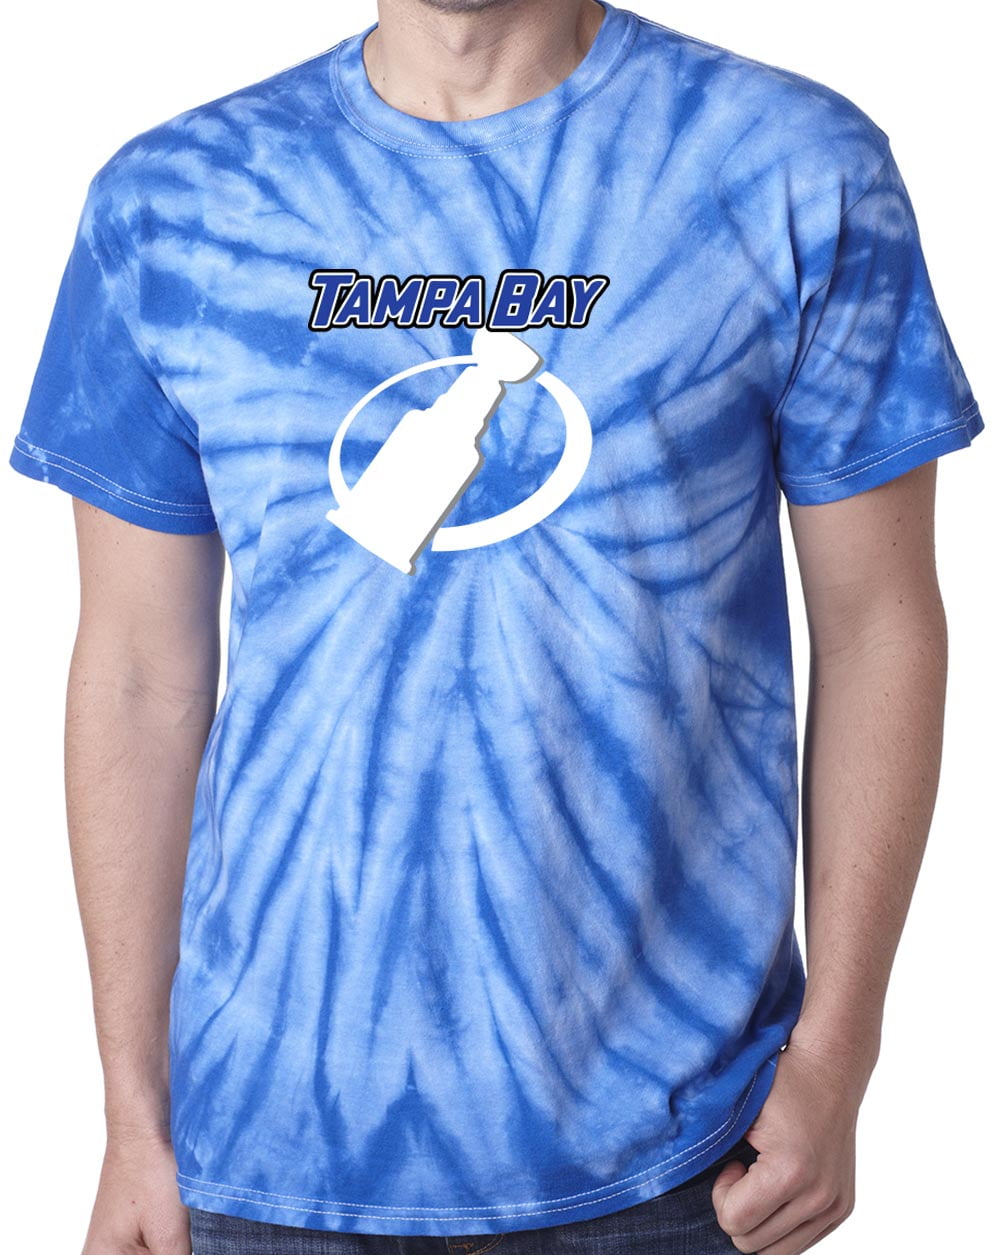 TIE-DYE BLUE Lightning Stanley Cup Champions T-shirt ADULT